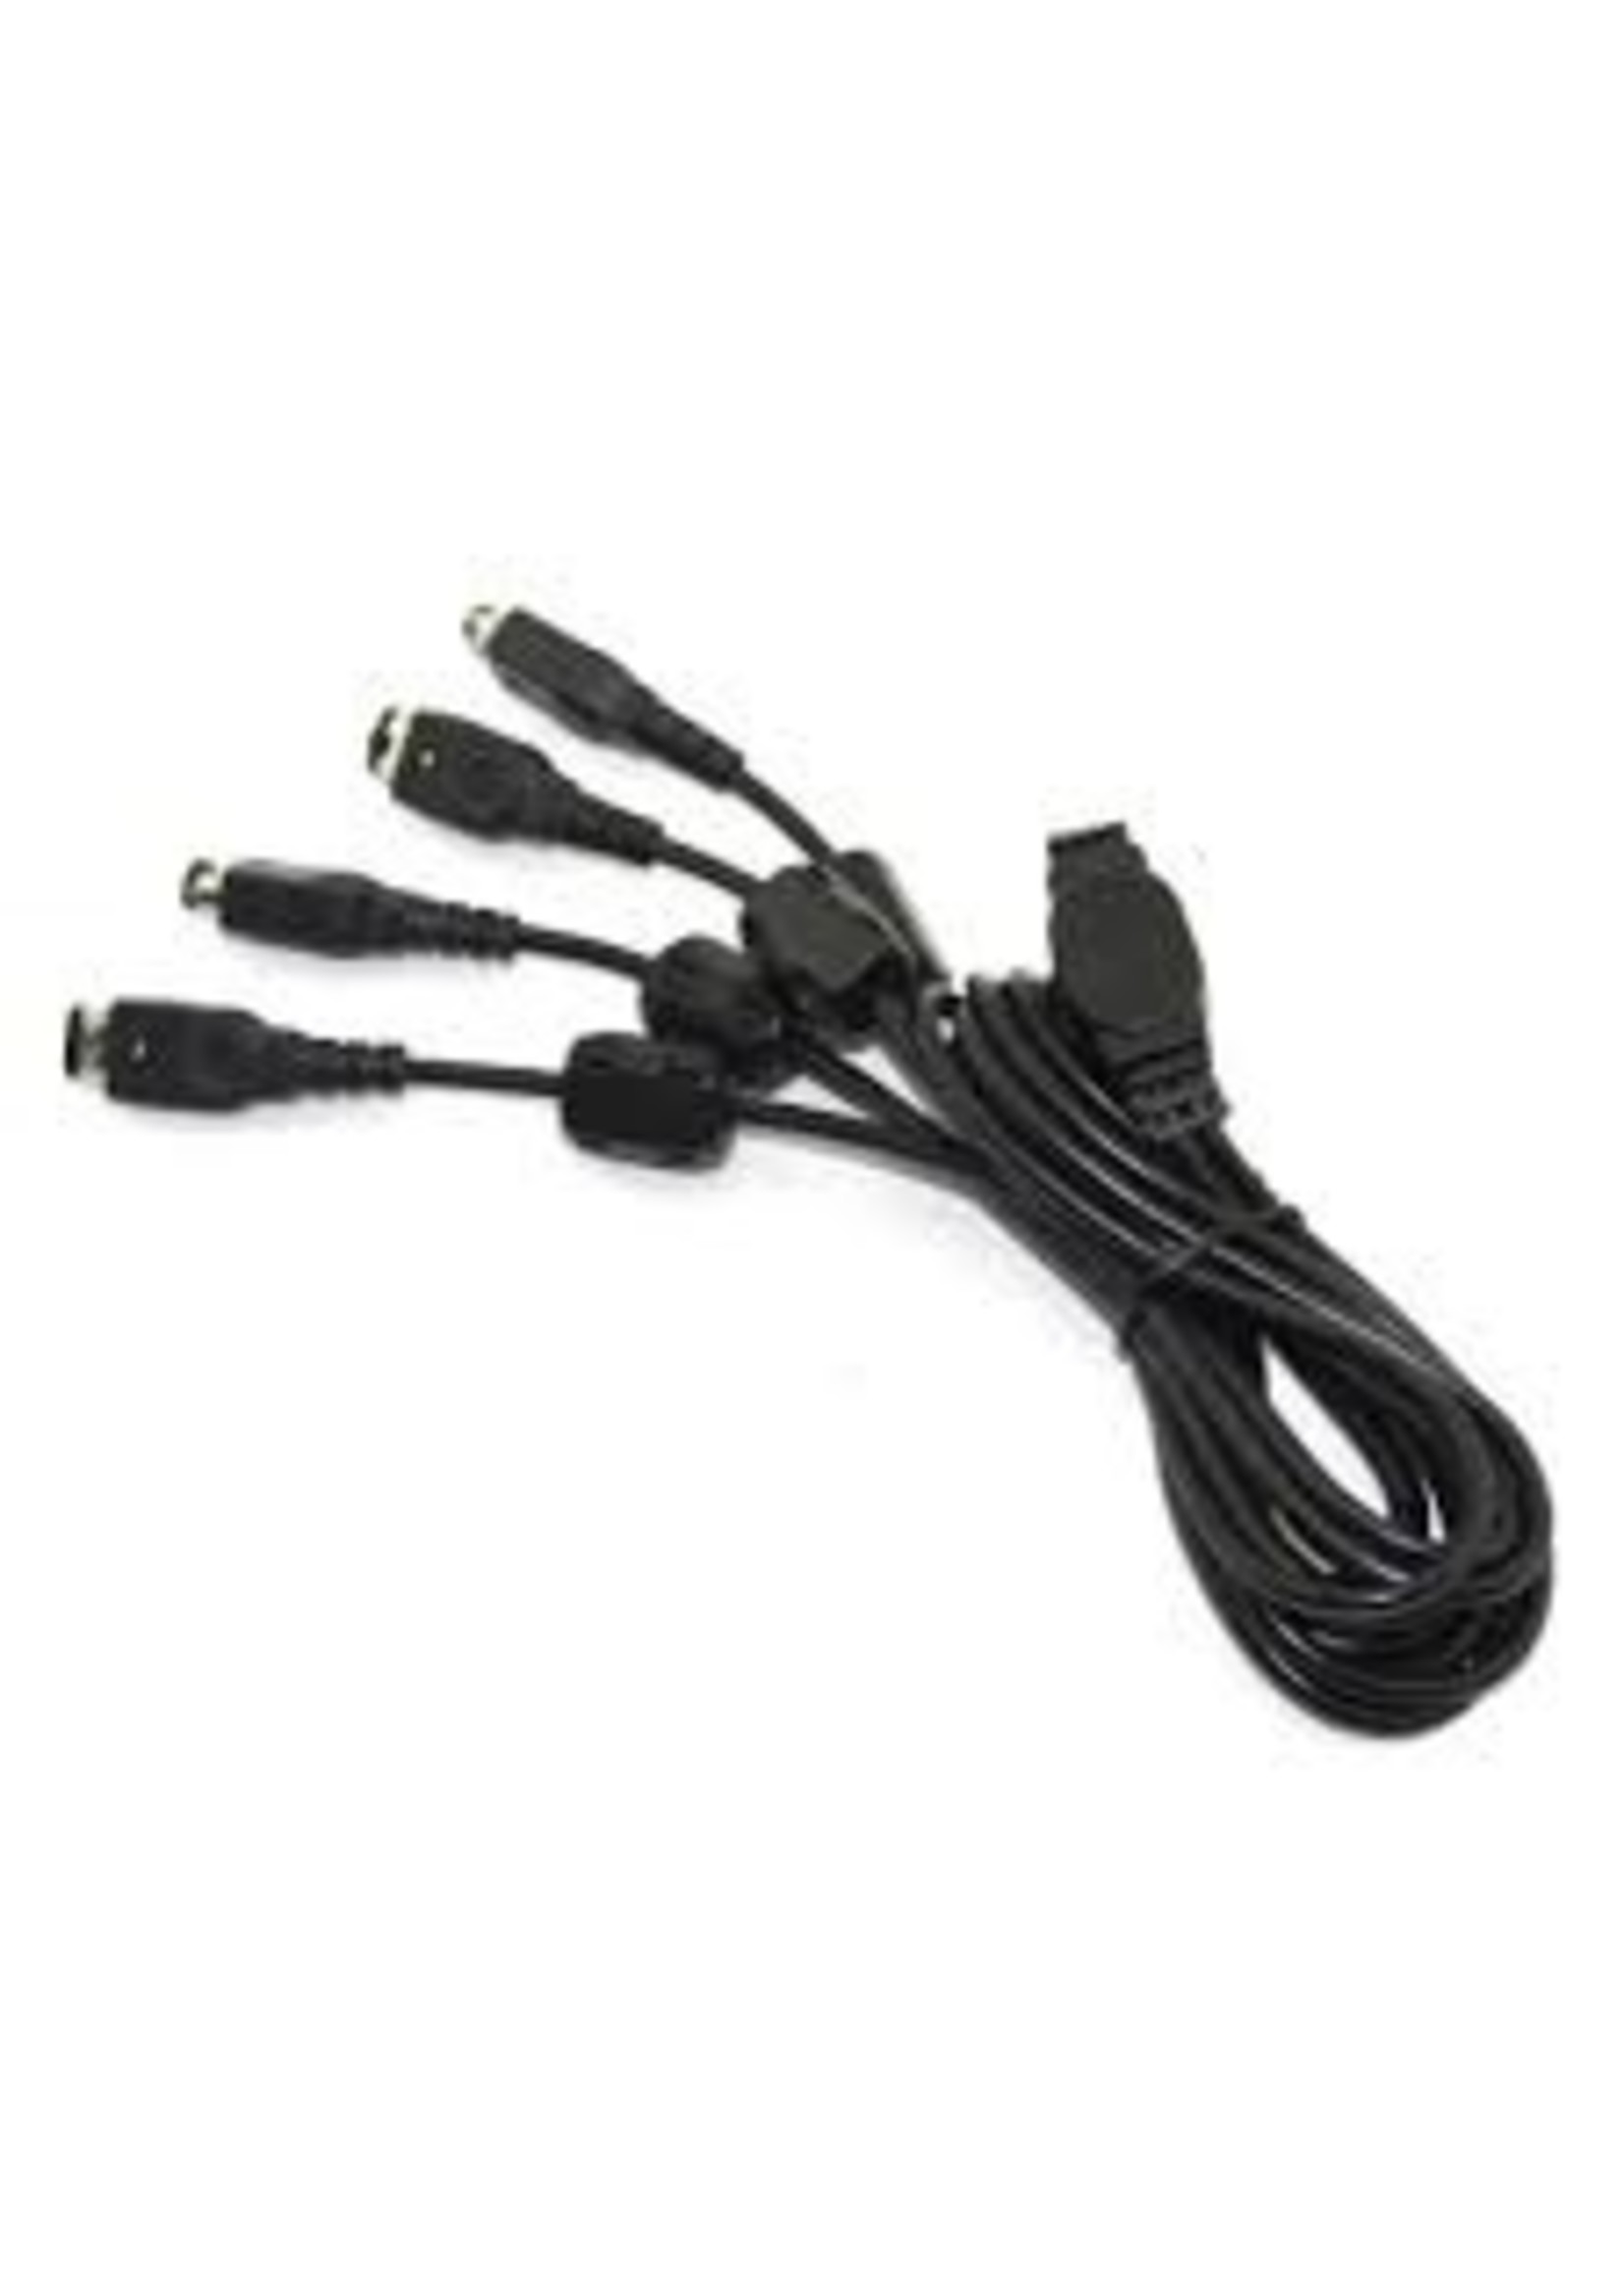 Nintendo Gameboy GBA SP / GBA 4 Player Link Cable (Used)